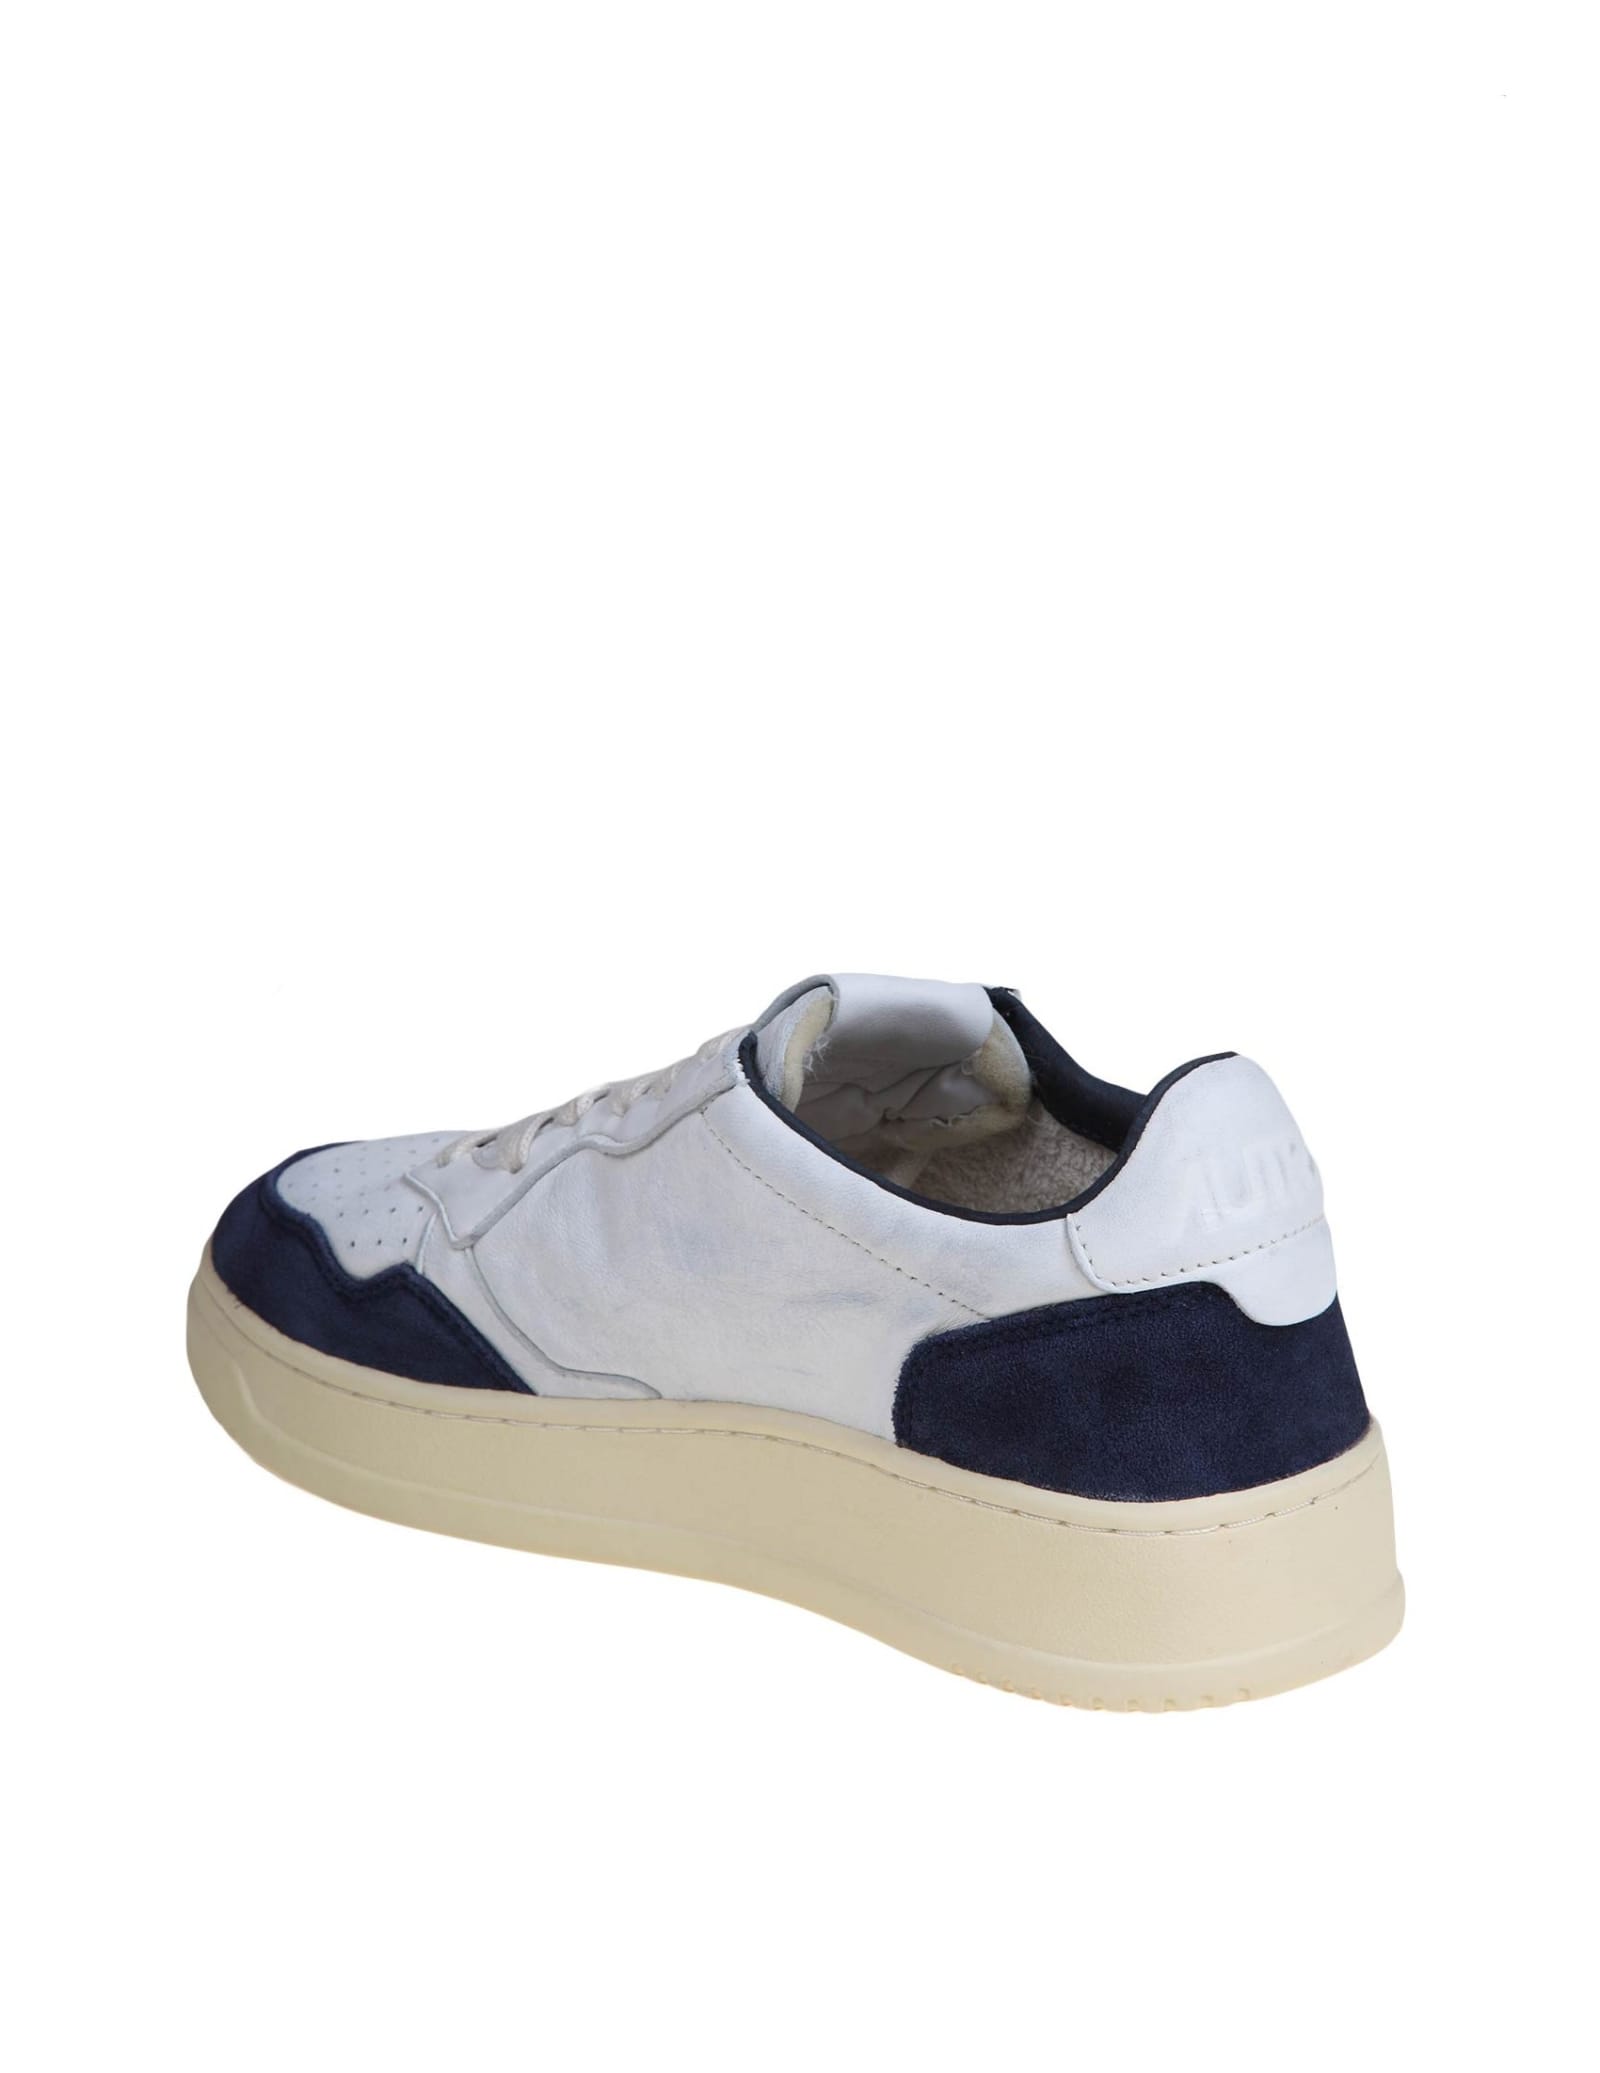 Shop Autry Medalist Sneakers In White And Blue Leather